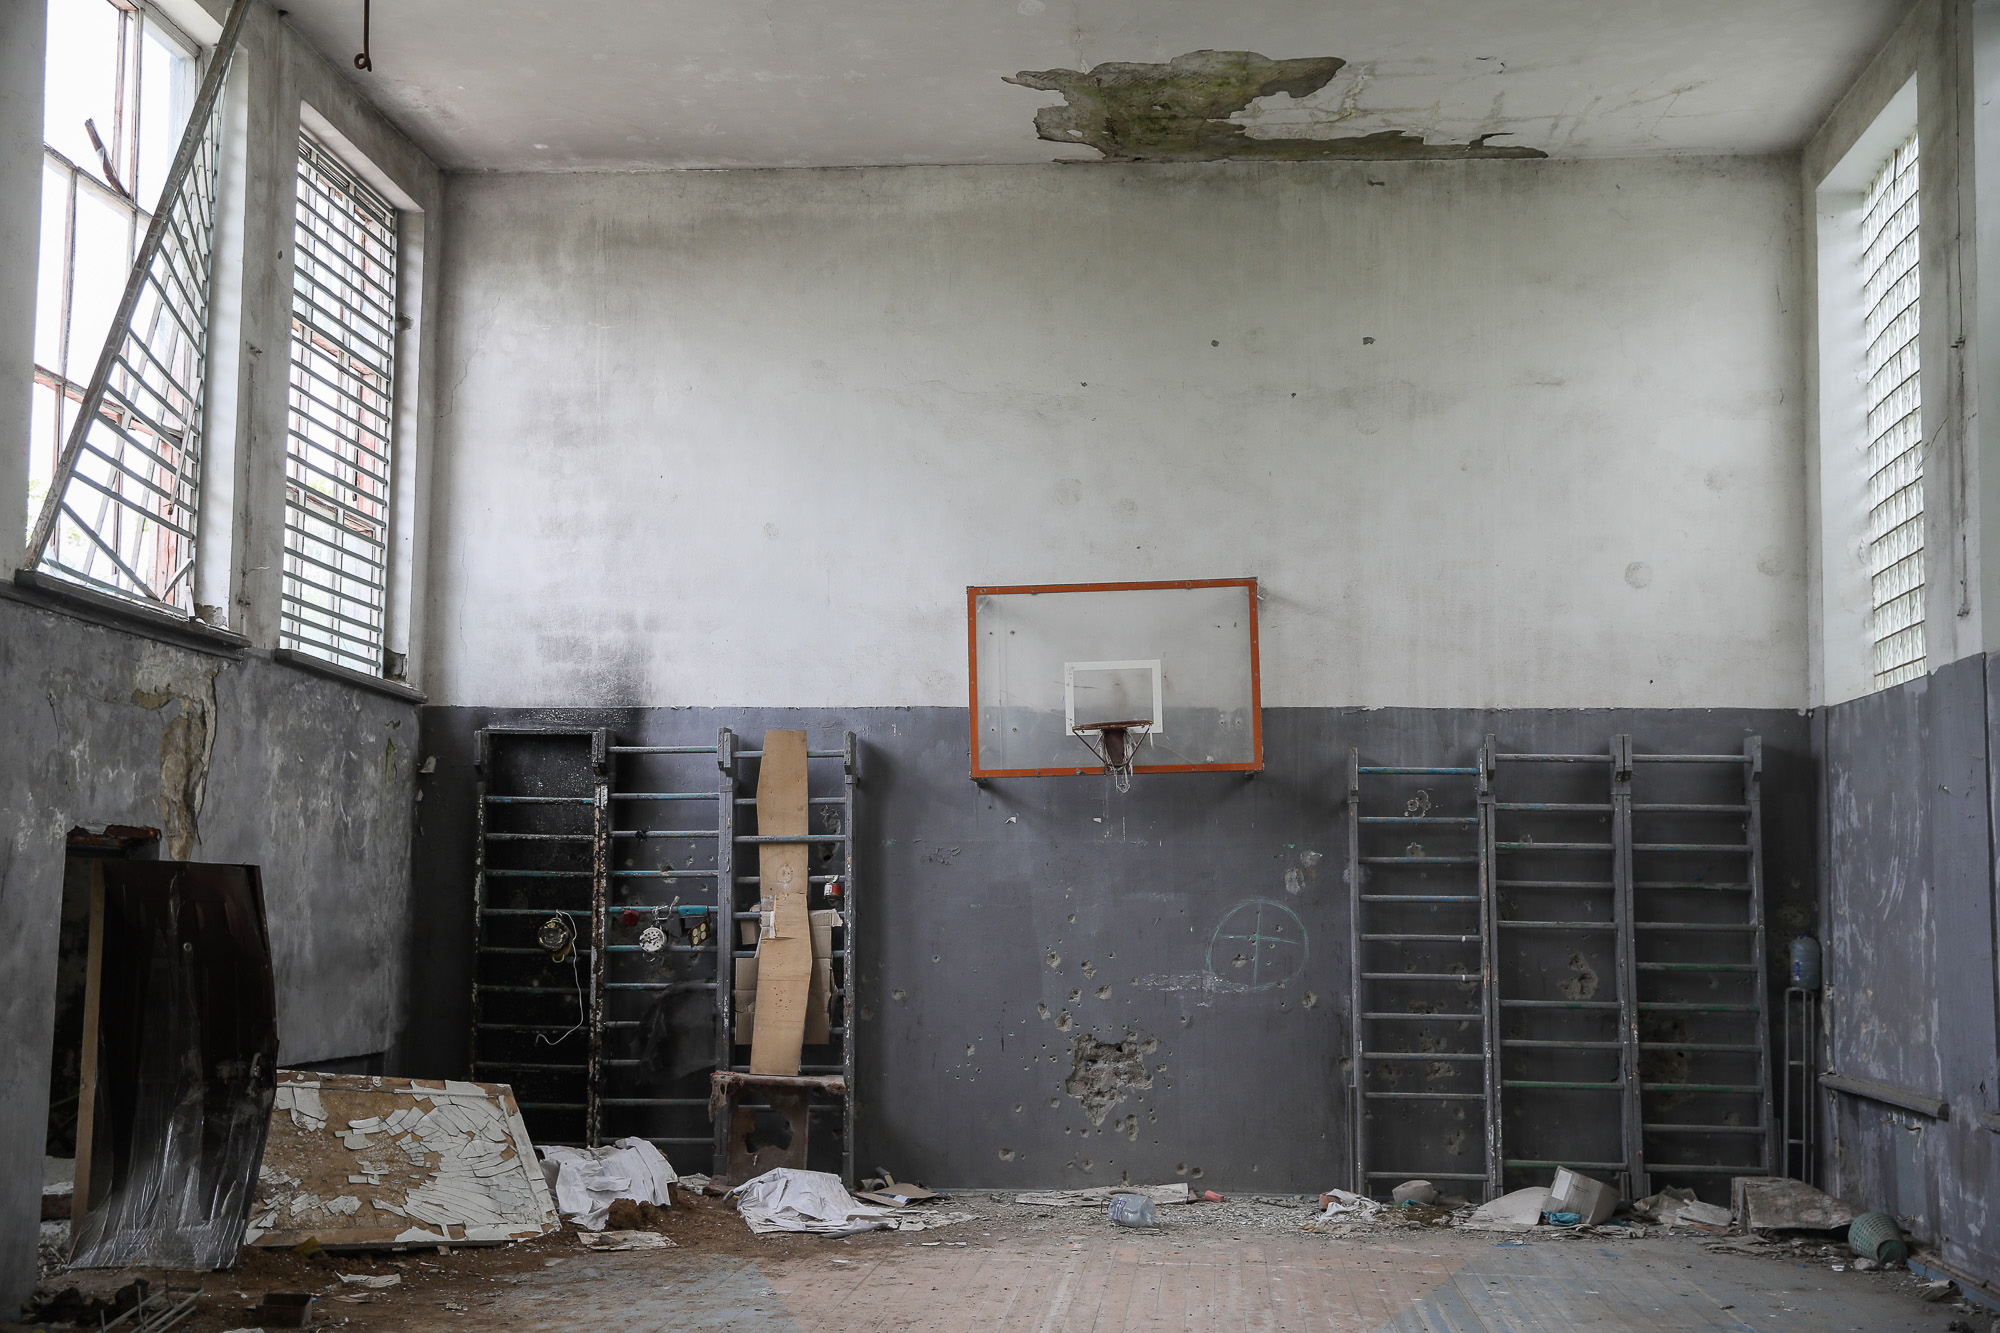 A damaged school gym wall riddled with bullet holes, pictured in the town of Opytne, eastern Ukraine, on June 12, 2019.